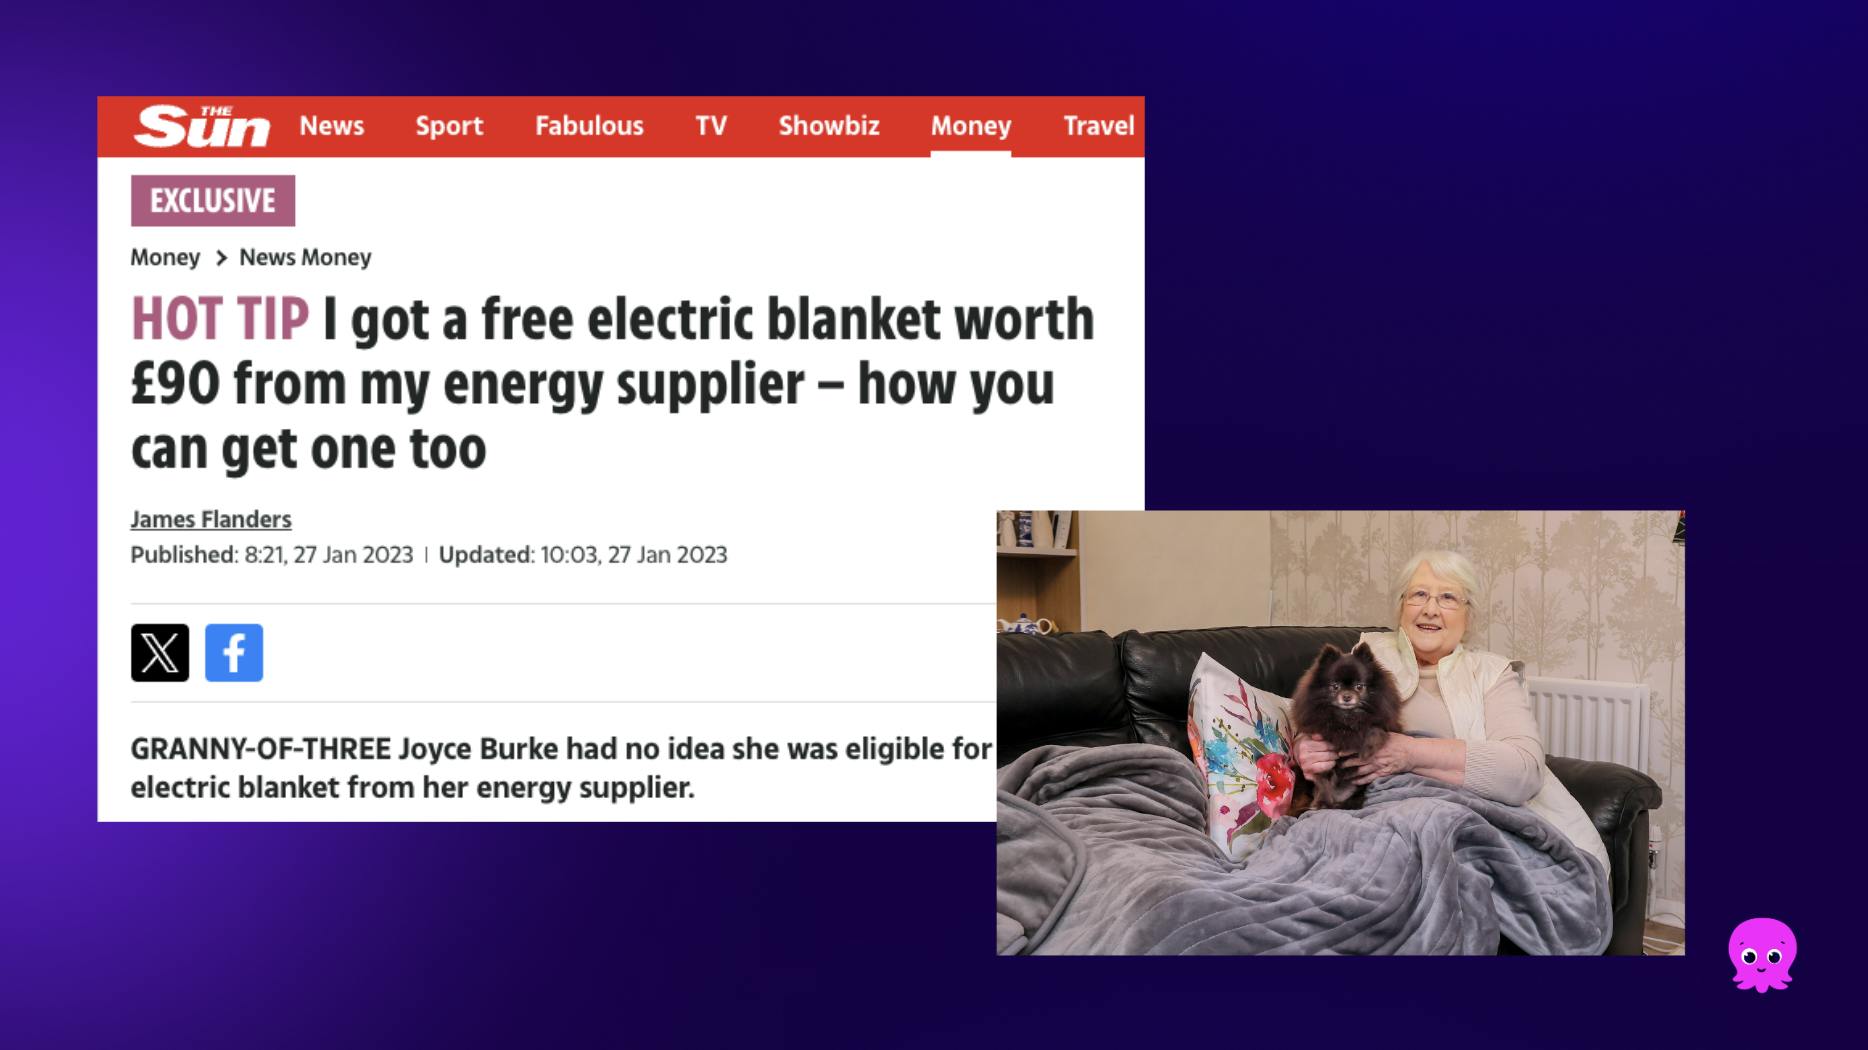 Screenshot of a news article about free electric blankets from Octopus Energy